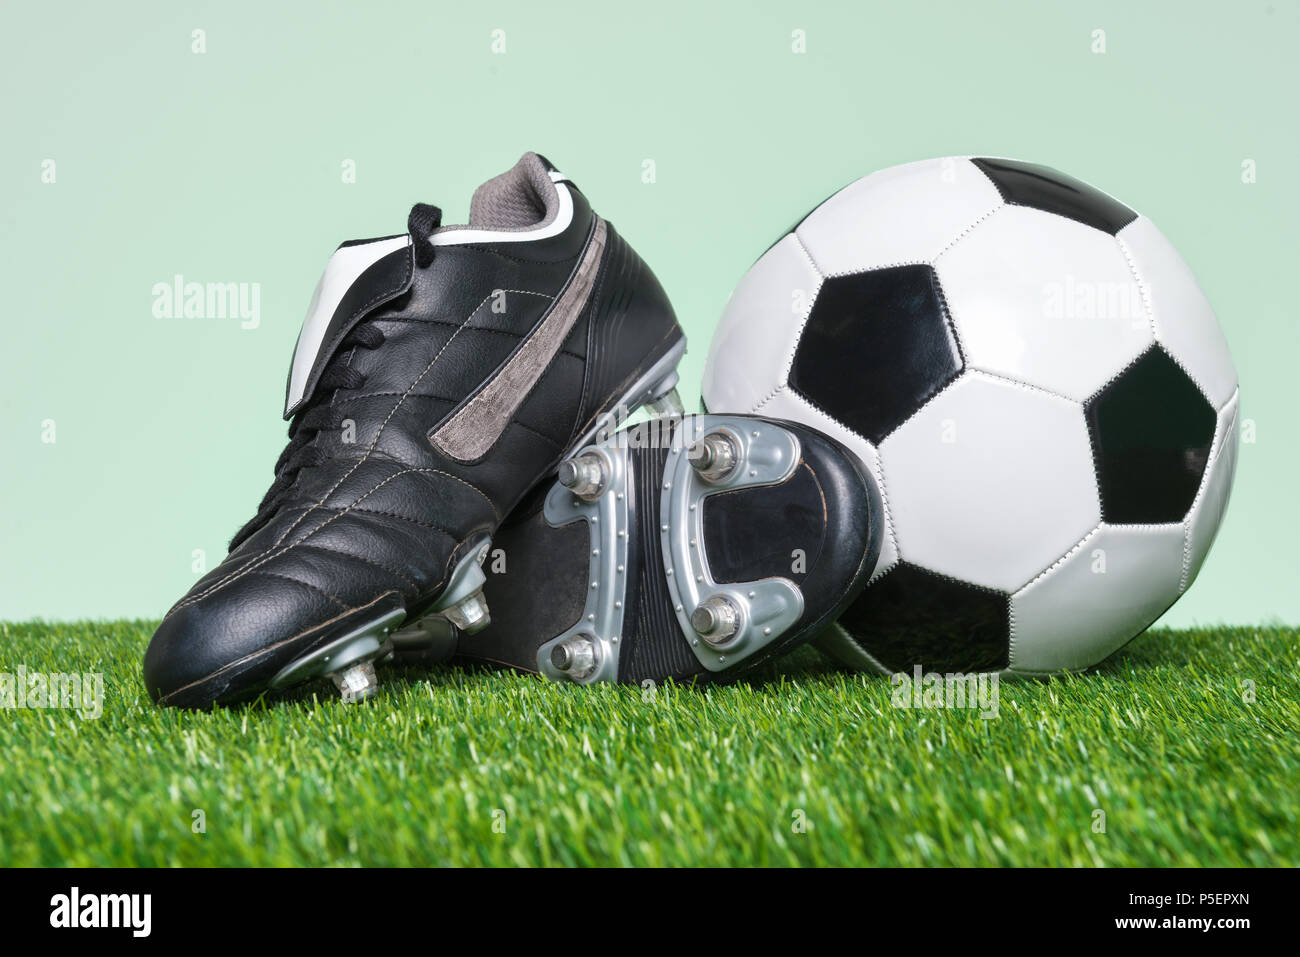 Football or Soccer boots and ball on grass with green background. Stock Photo